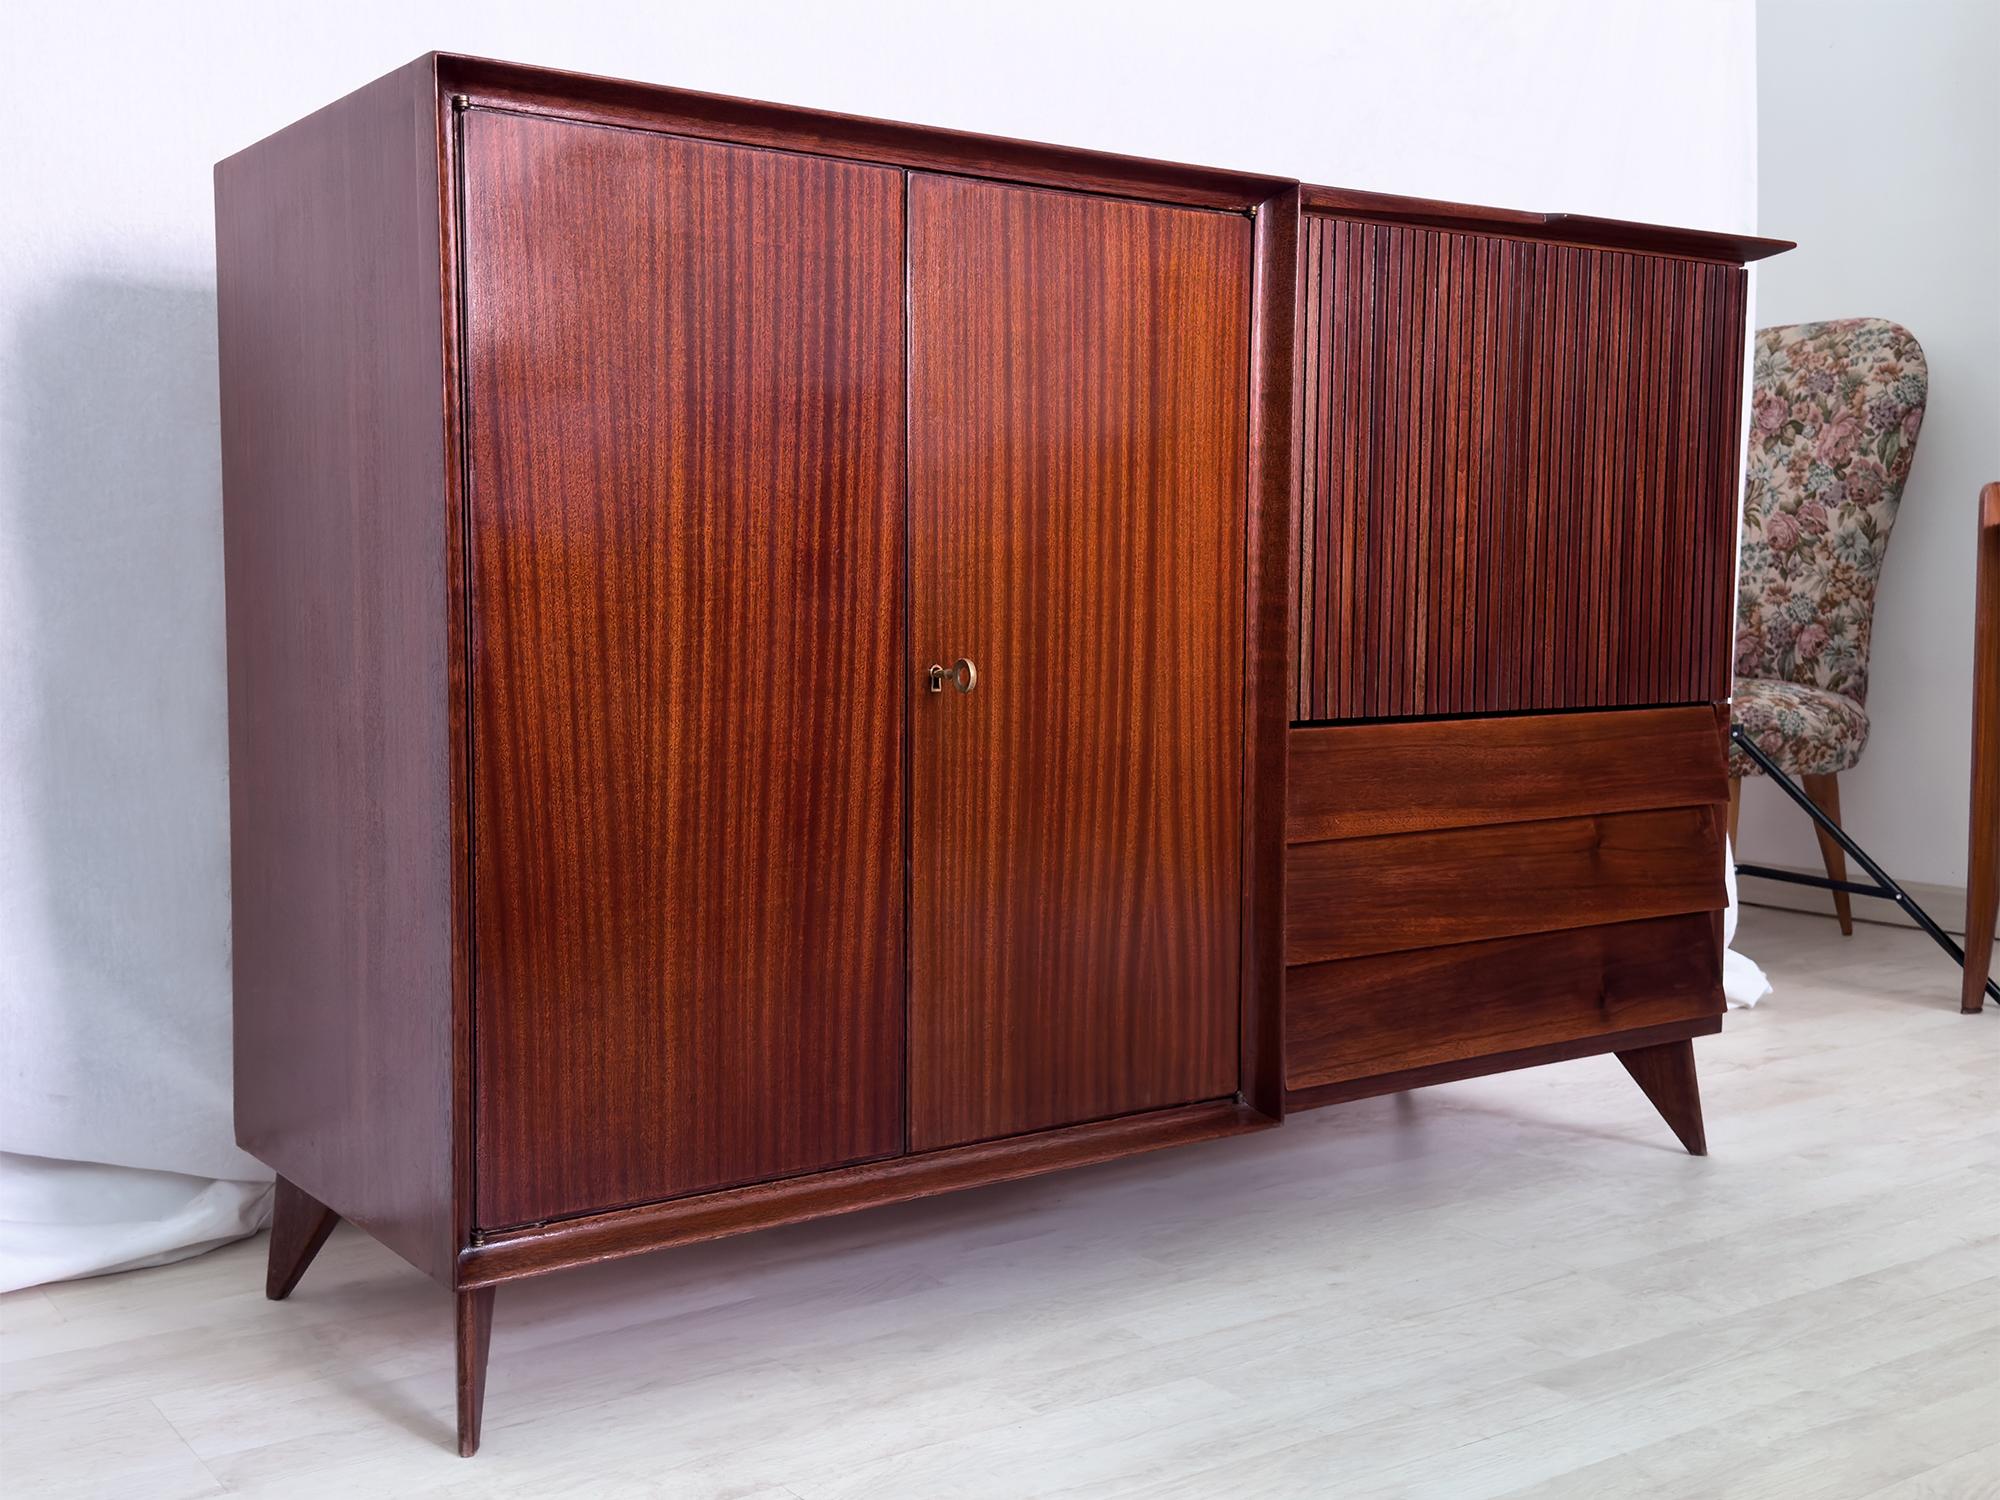 Italian Mid-Century Teak Wood Sideboard with Bar Cabinet by Vittorio Dassi, 1950s For Sale 12